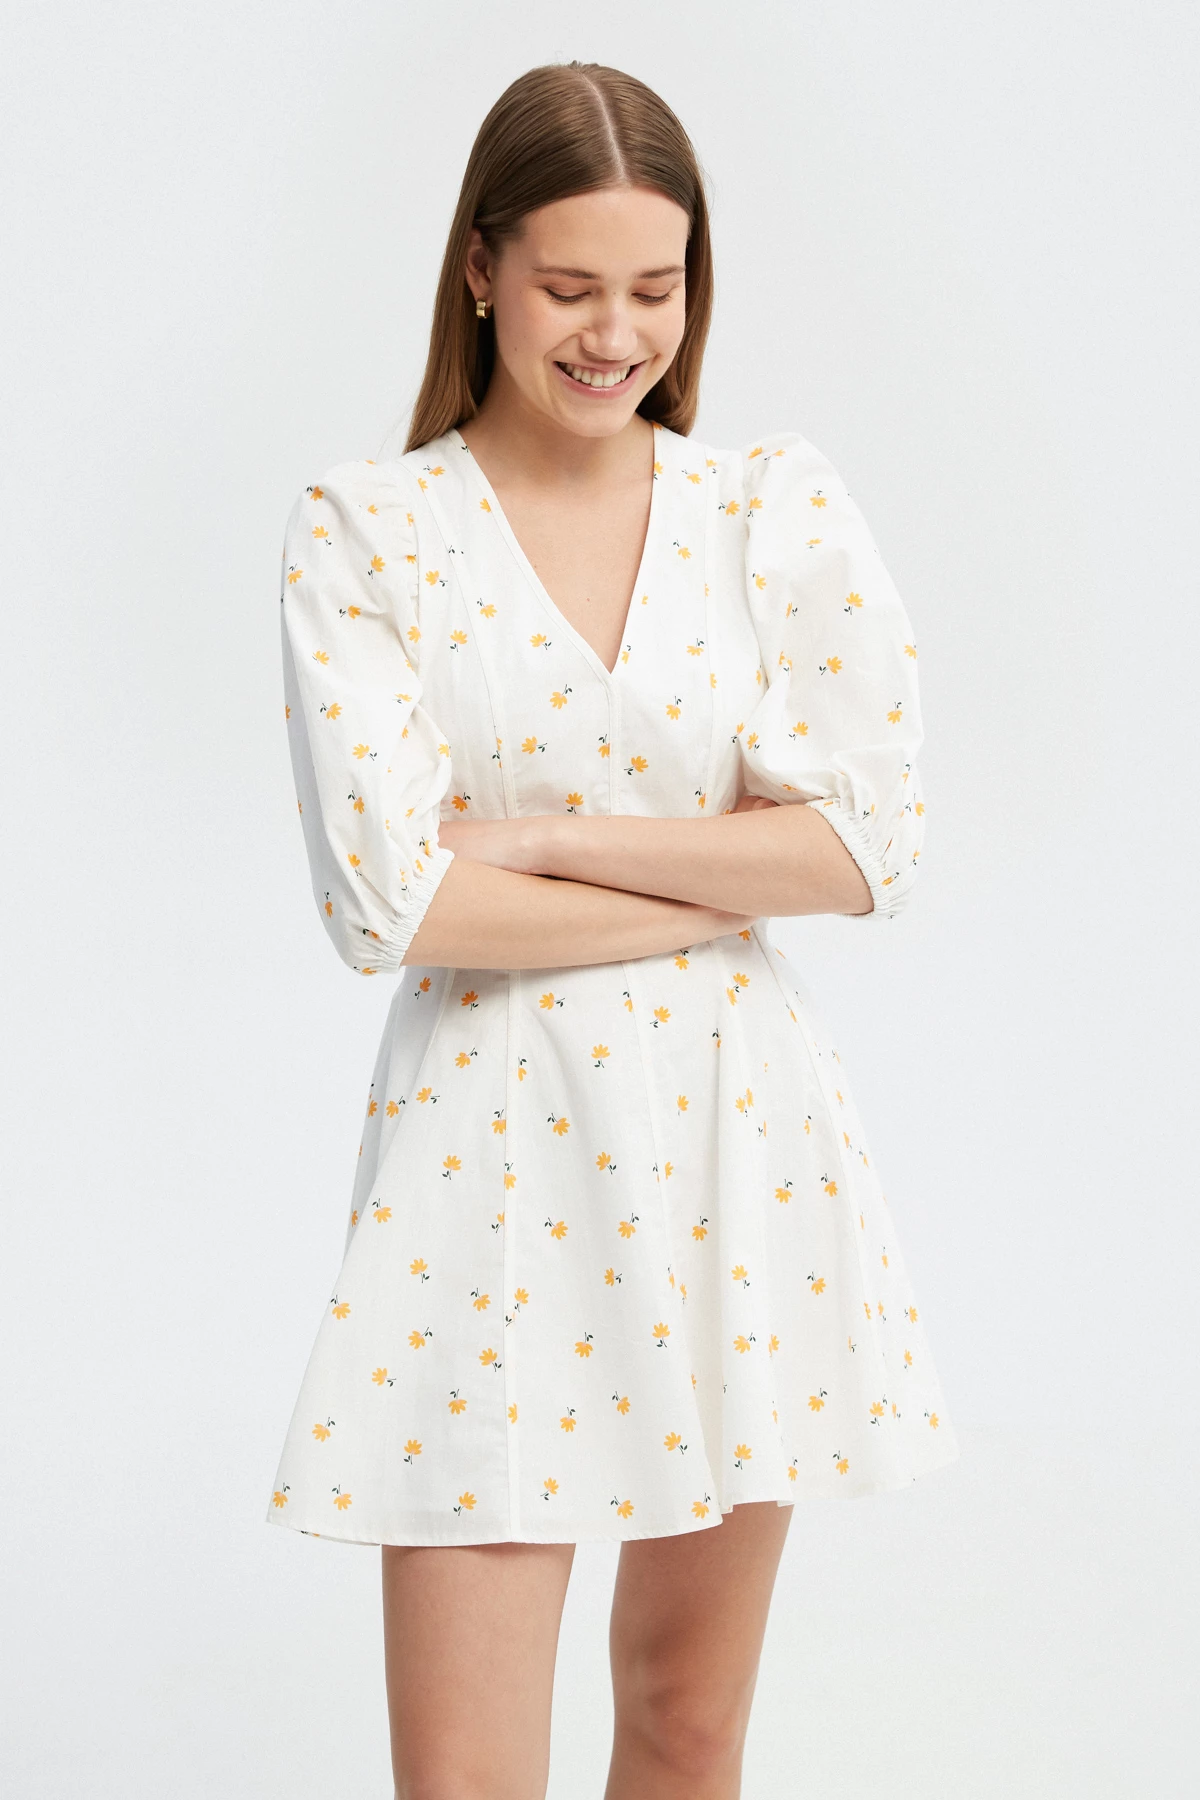 White short cotton dress with yellow flowers print, photo 1